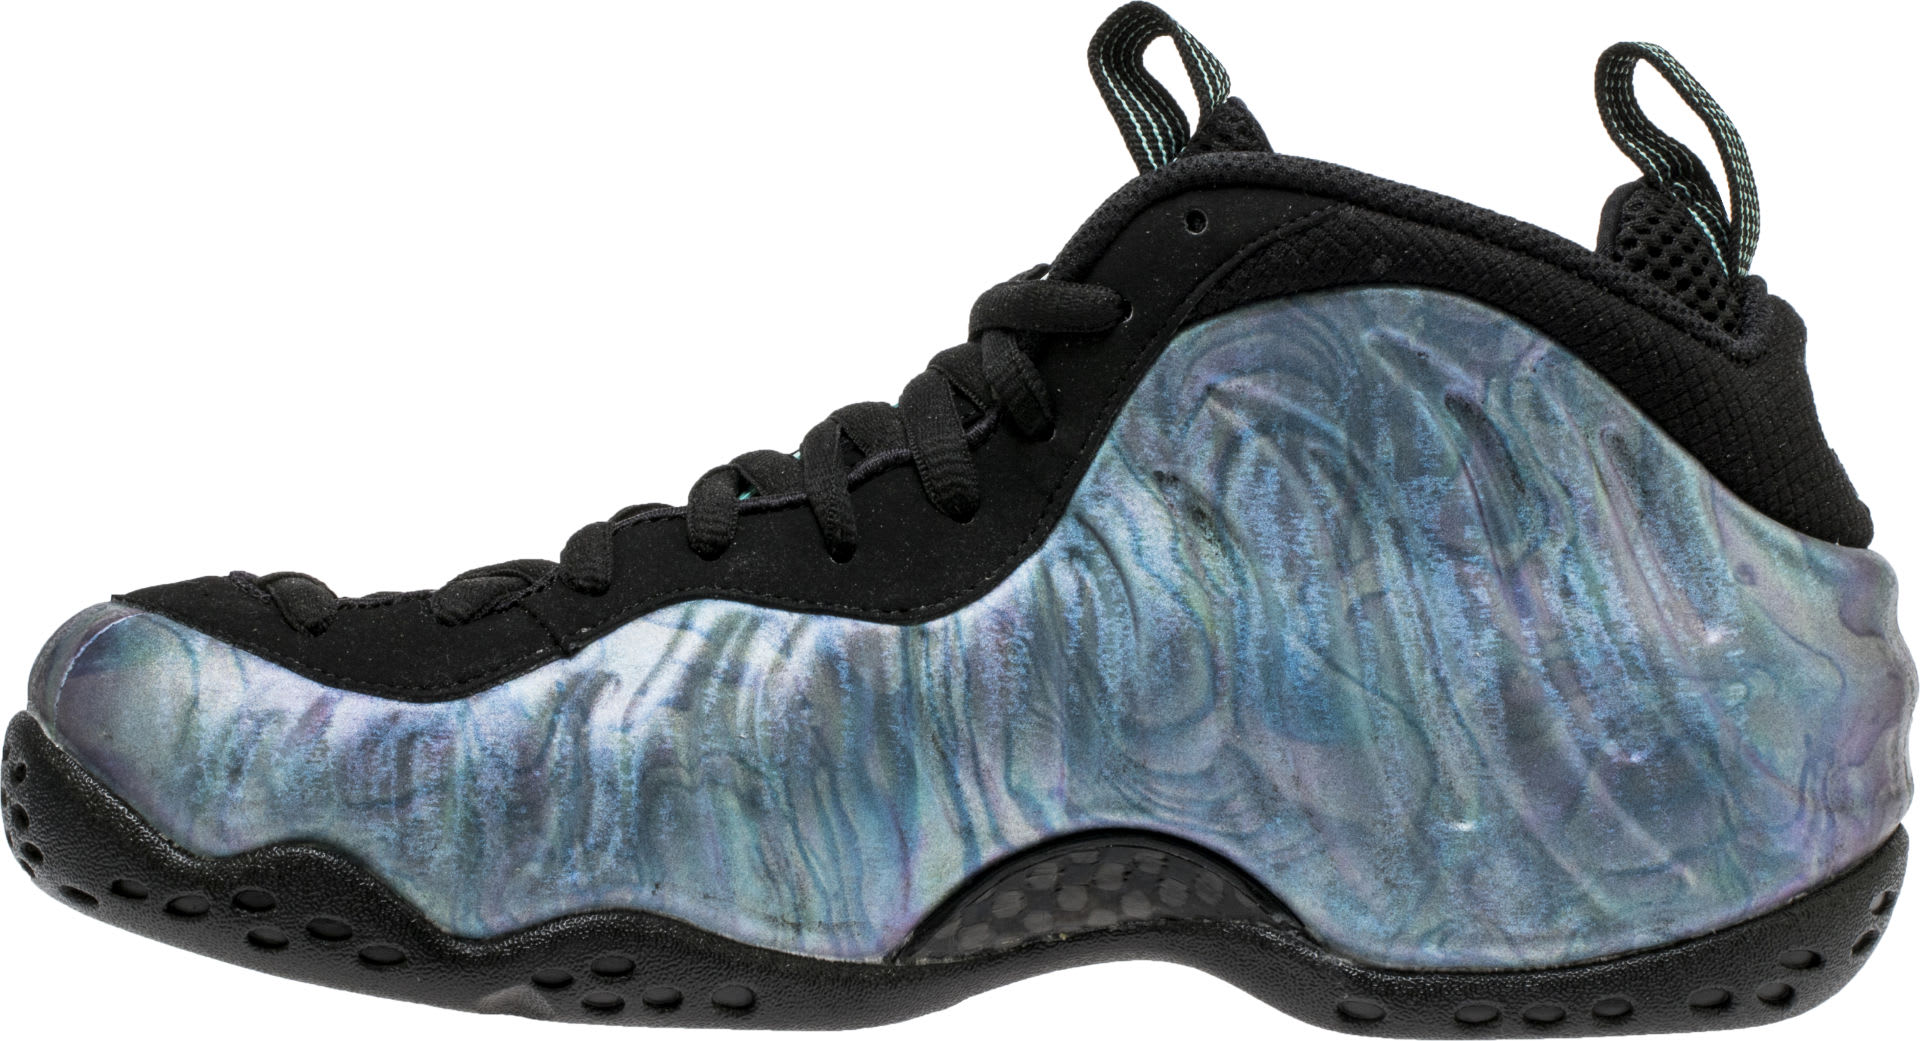 Nike Air Foamposite One Abalone Release Date 575420-009 Medial